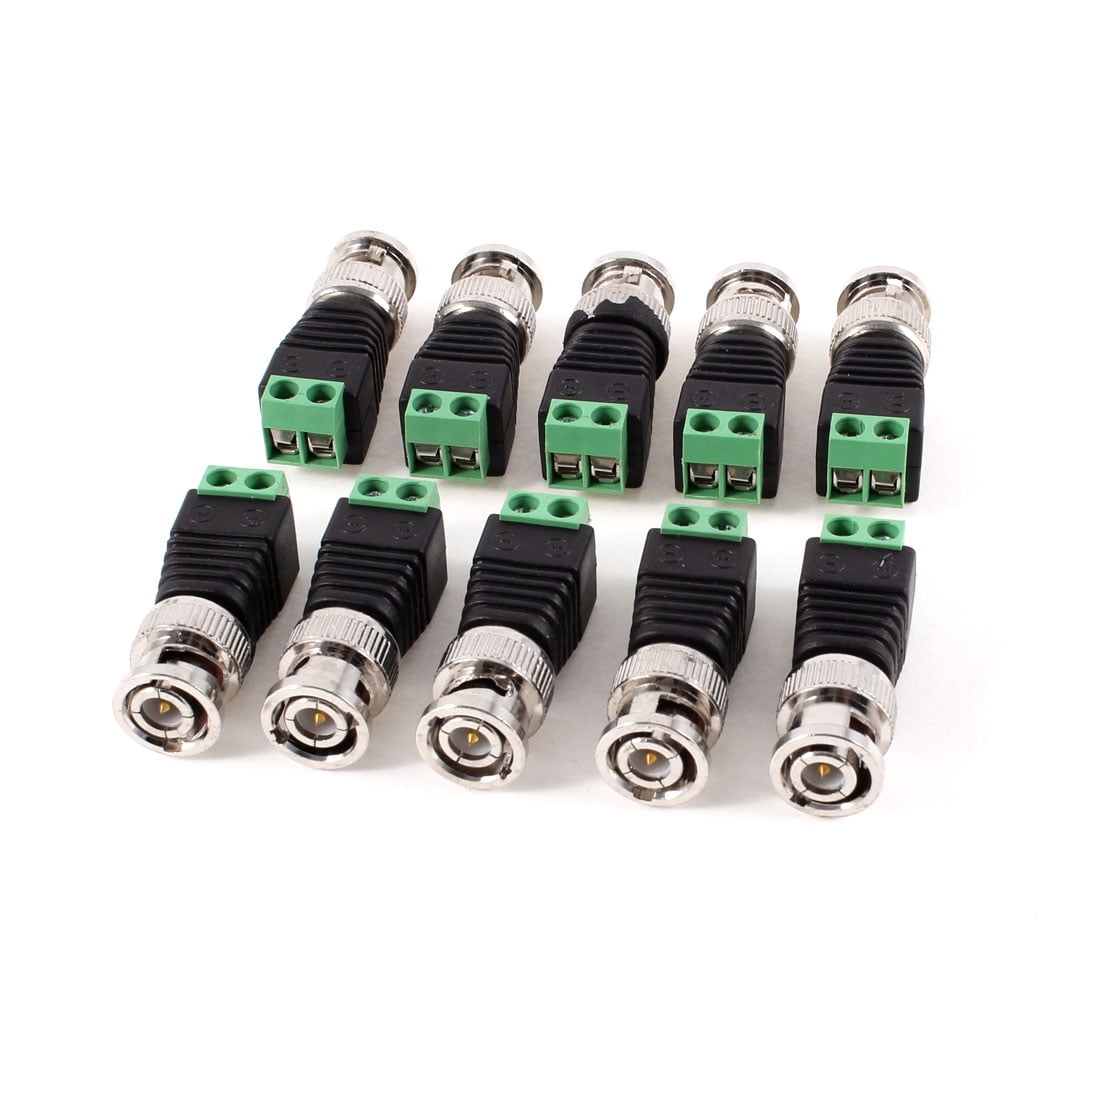 10pcs Male Coax CAT5 To Coaxial BNC Cable Connector Adapter-Camera CCTV Video 